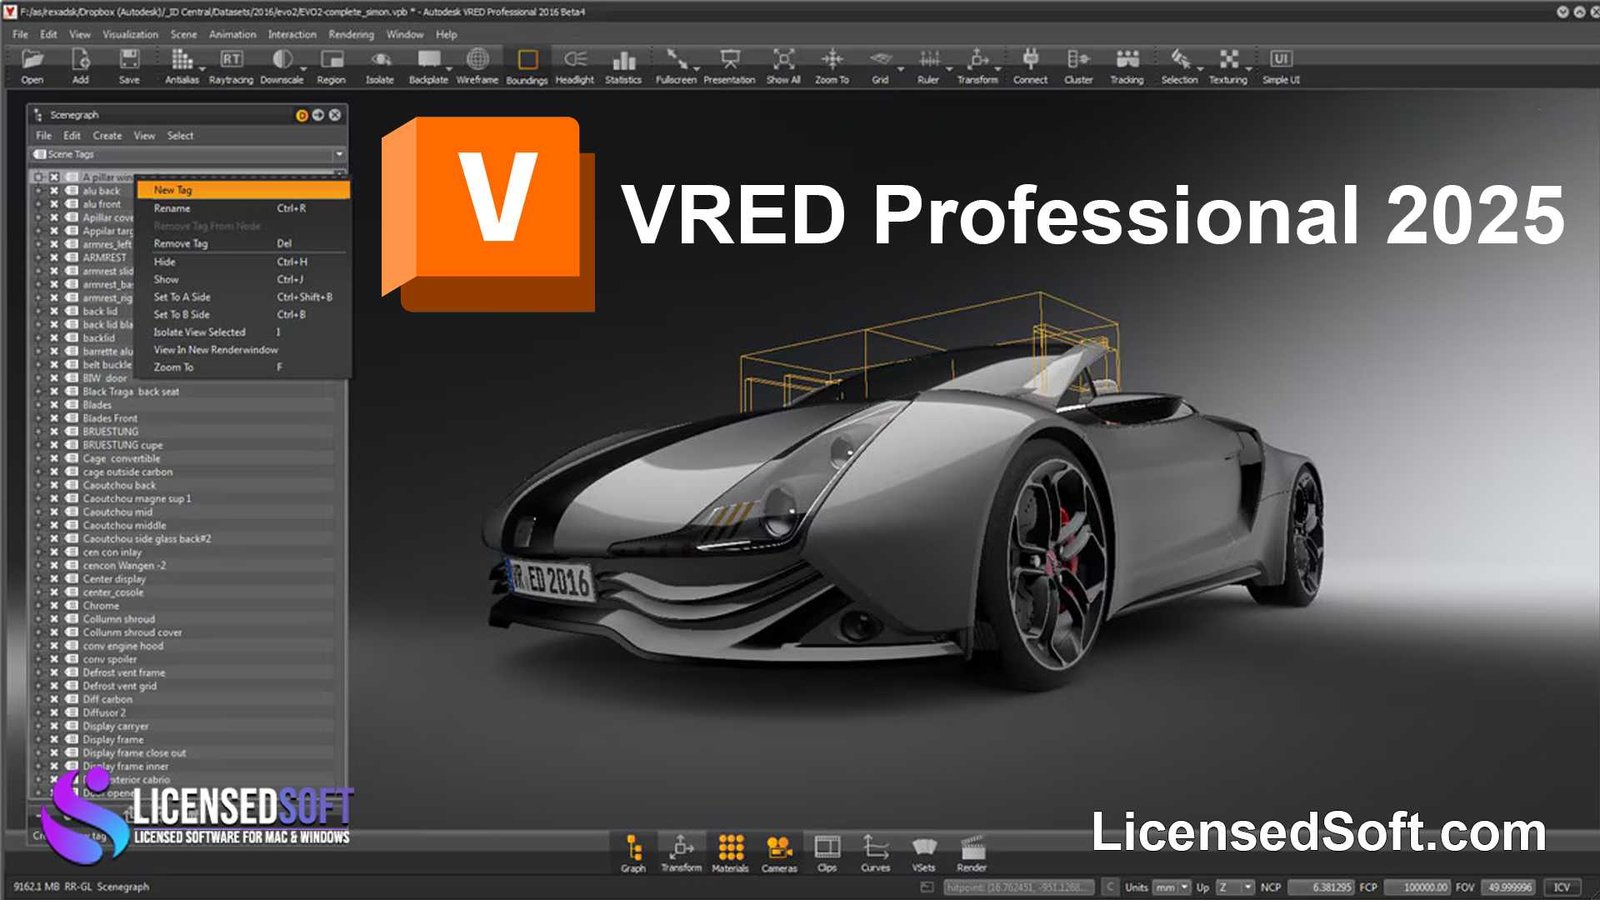 Autodesk VRED Professional 2025 Perpetual License By LicensedSoft